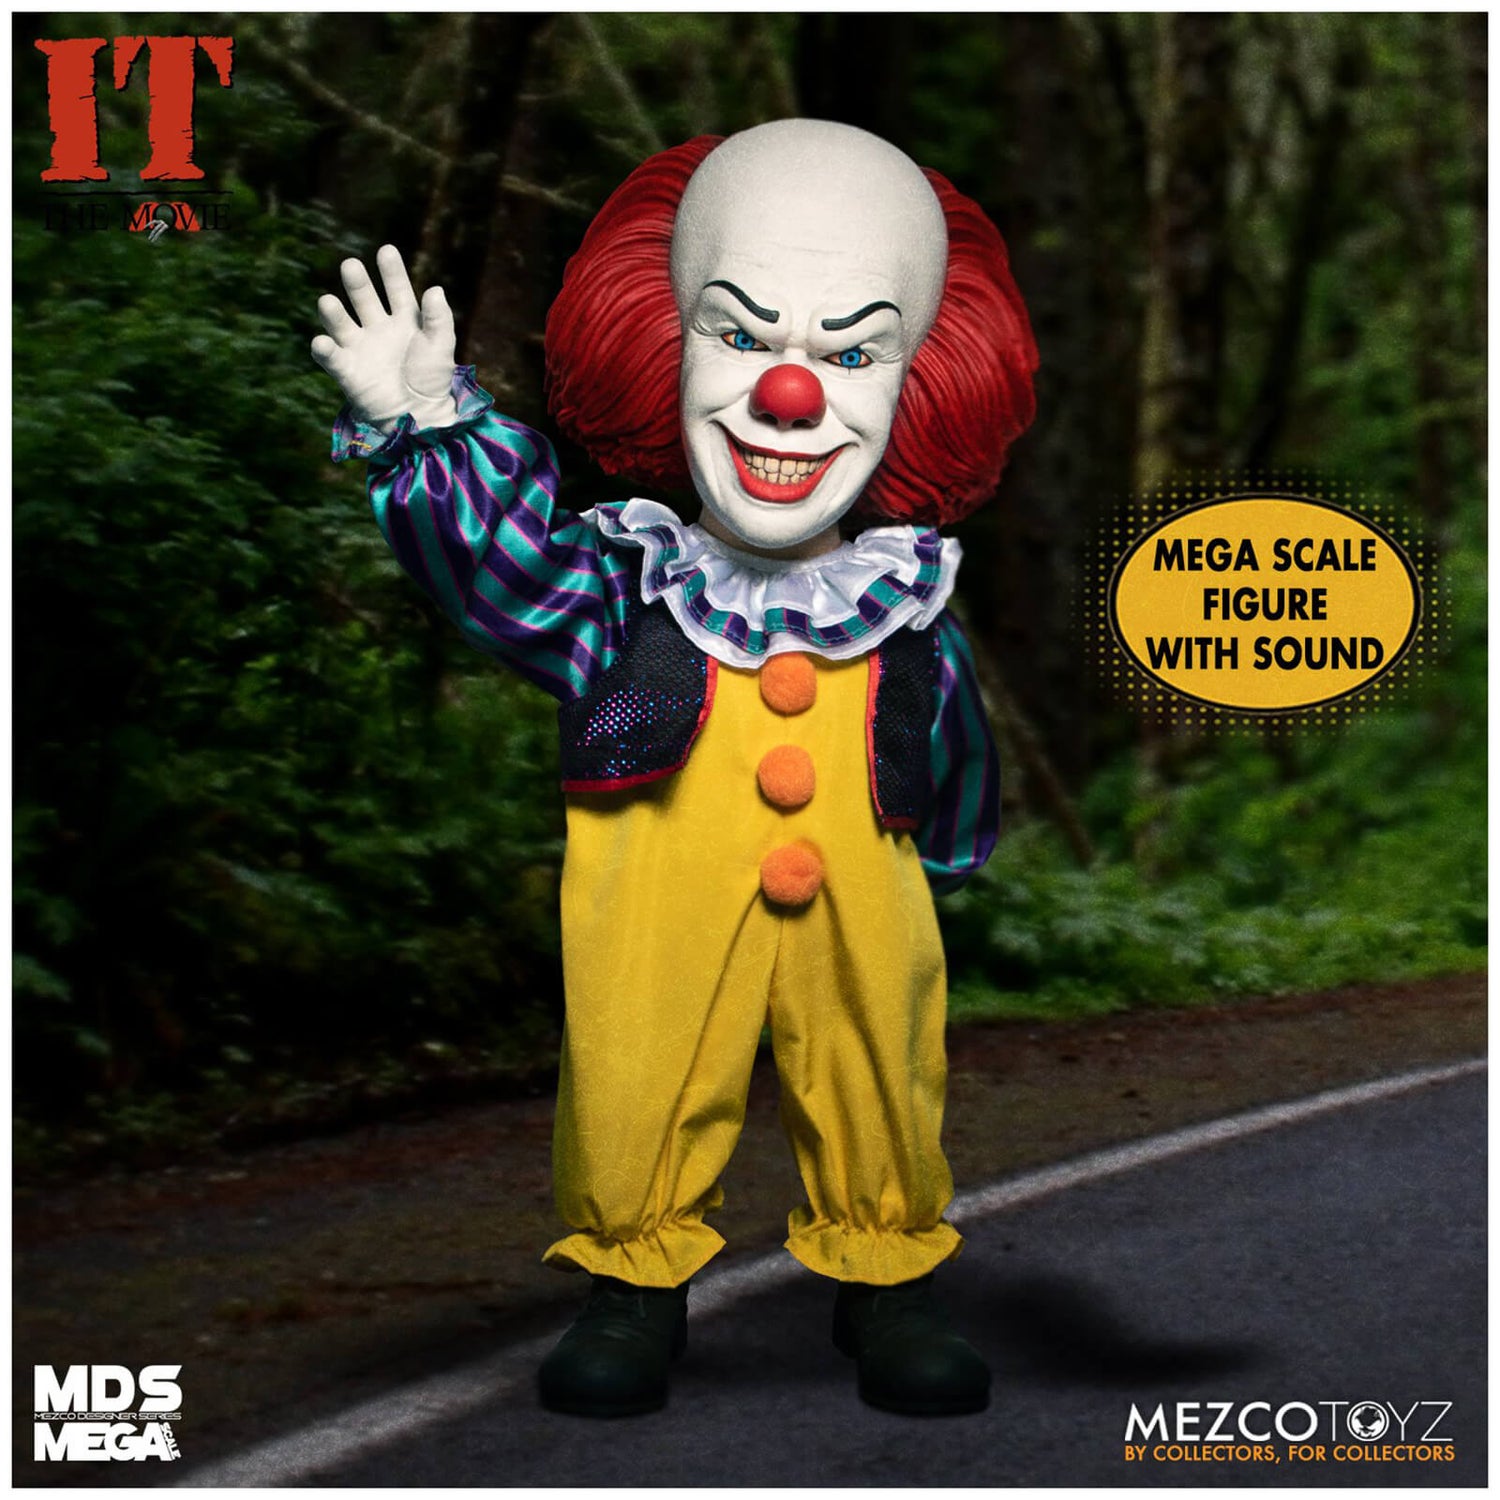 Mezco Es (1990) Pennywise MDS Mega Scale Puppe mit Sound